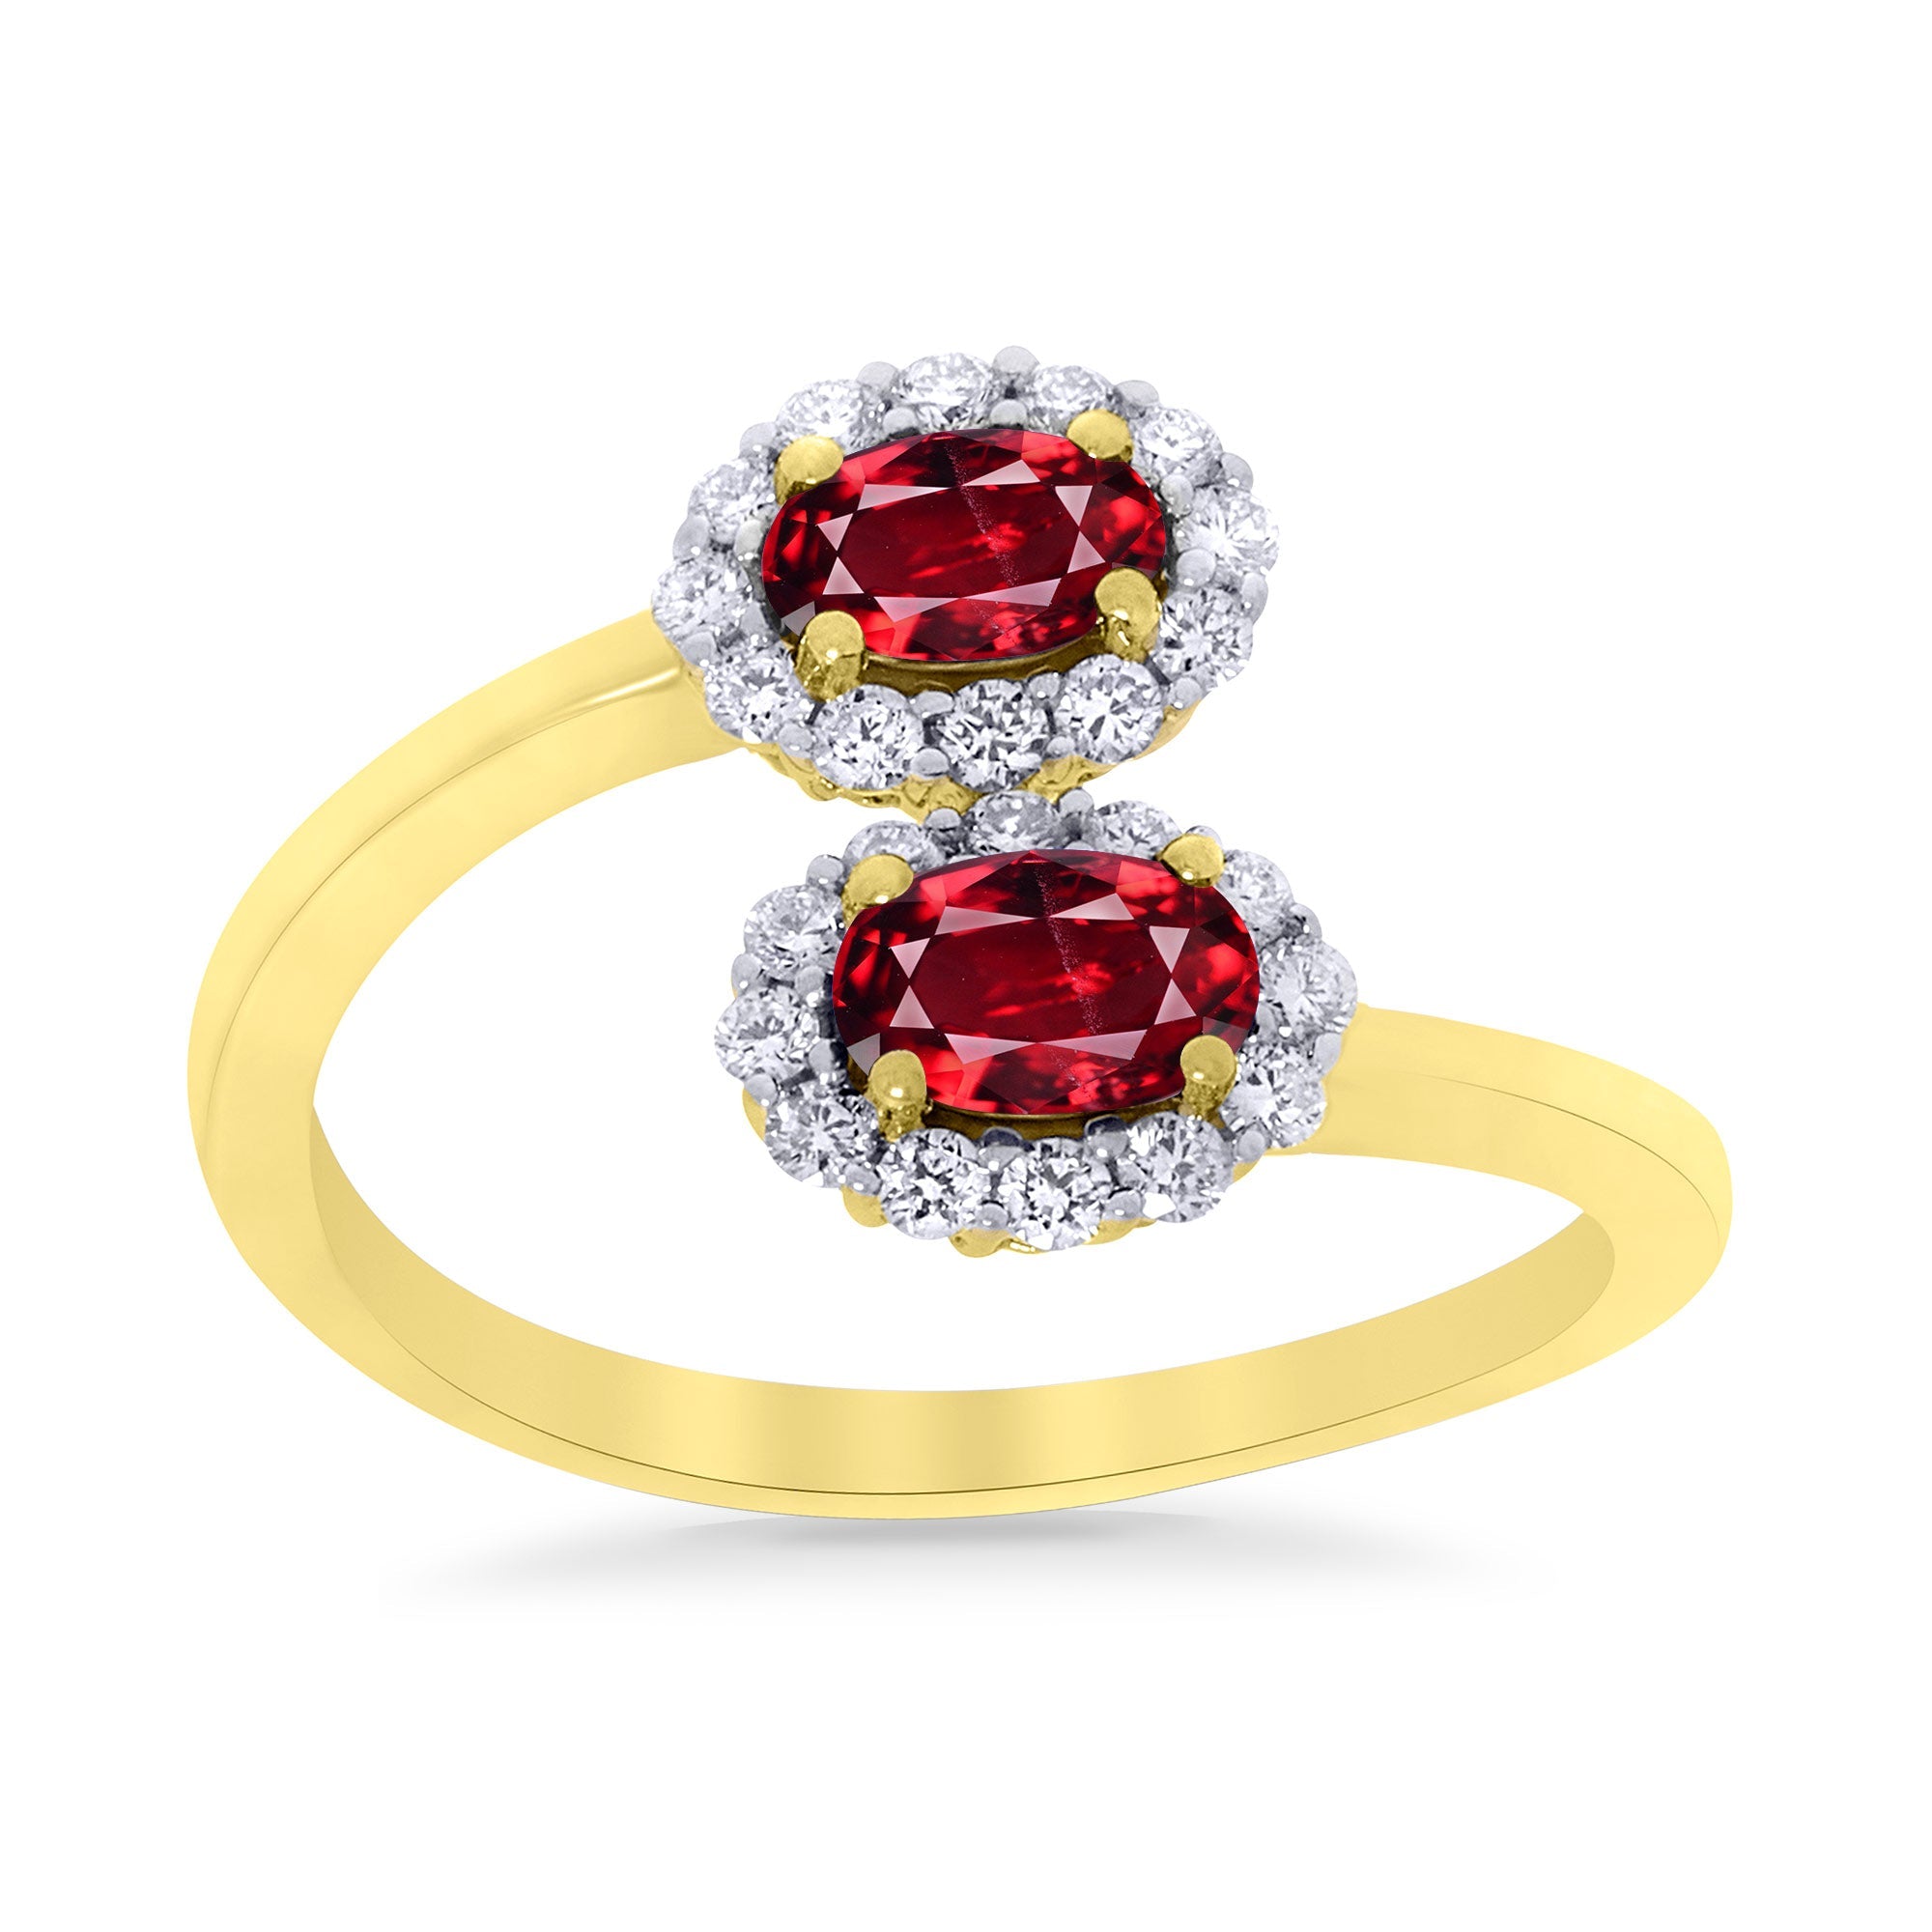 9ct gold double 5x3mm oval garnet & diamond crossover cluster ring 0.14ct